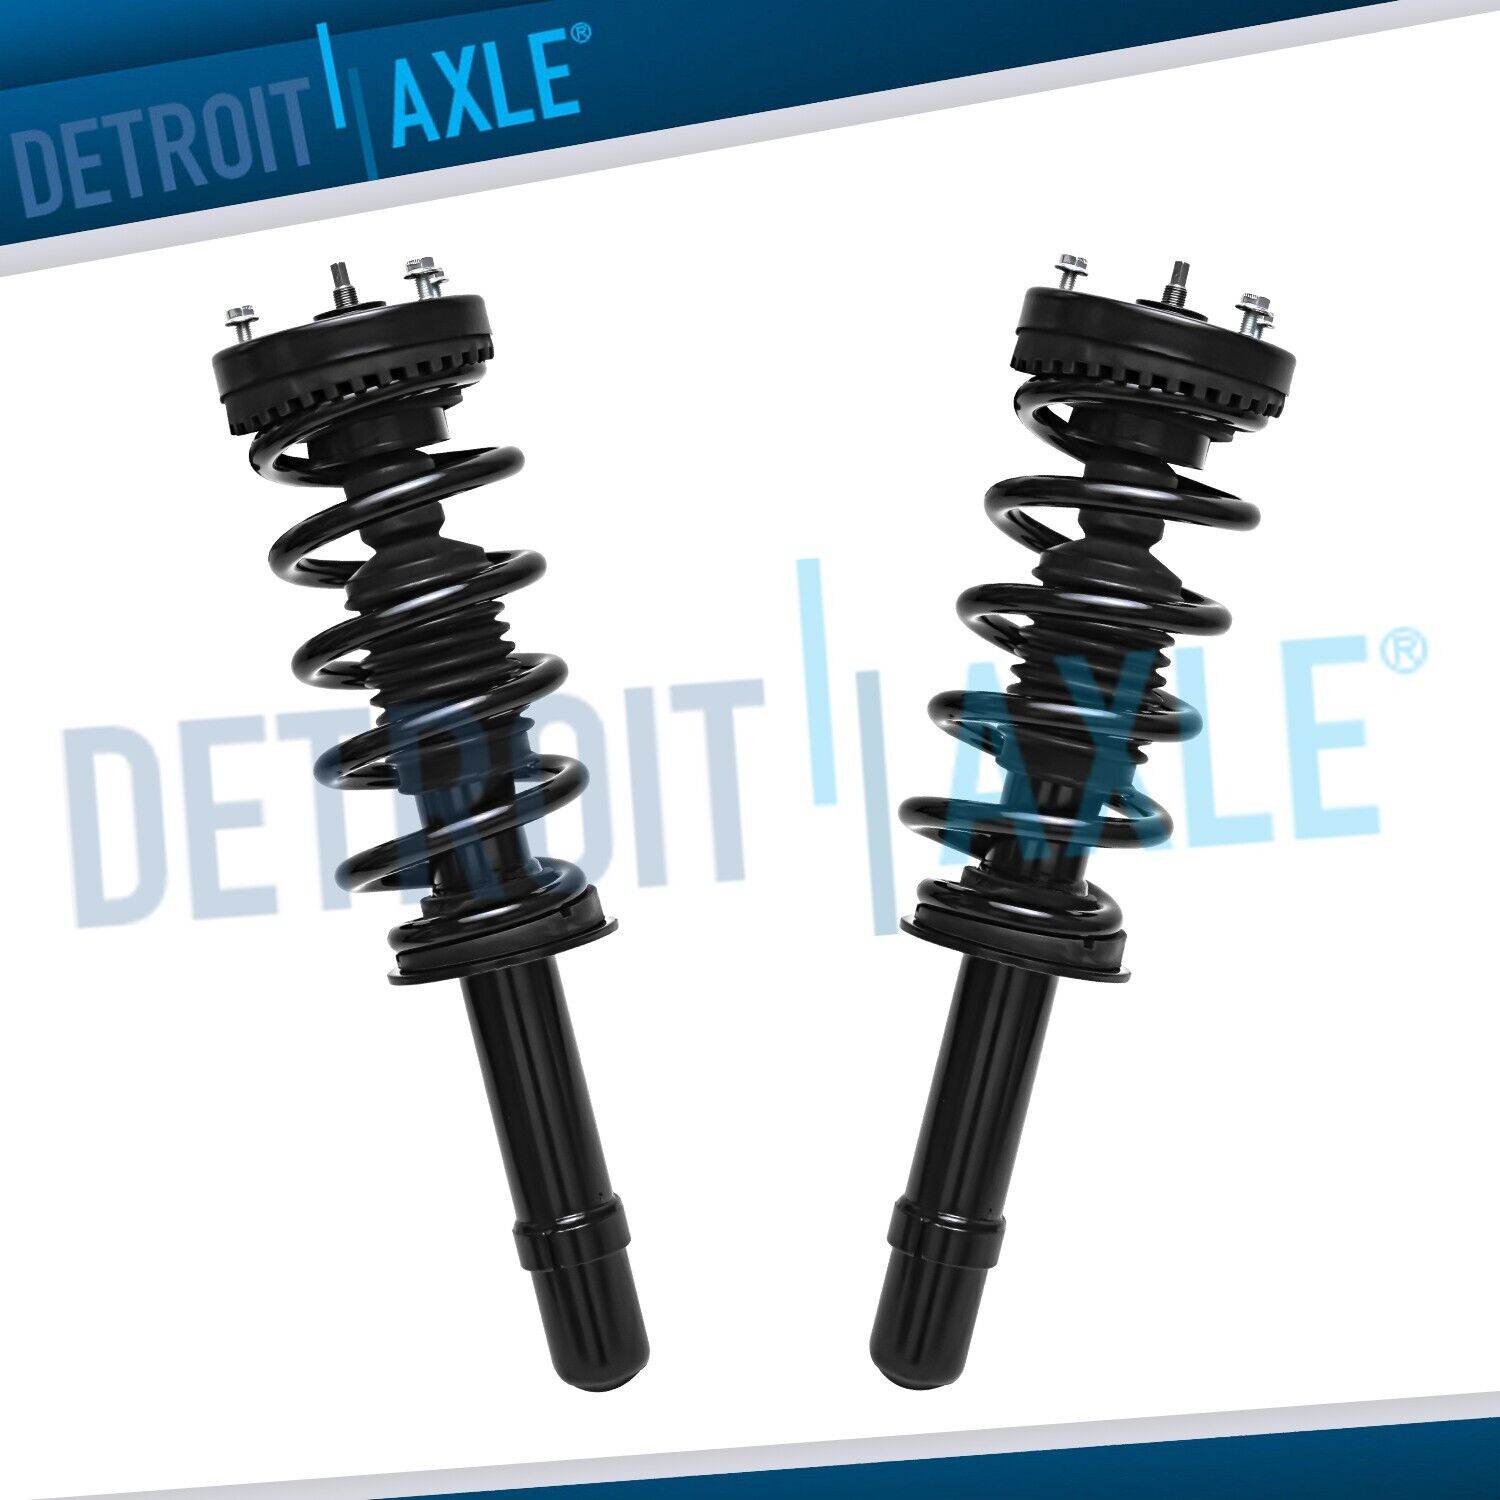 AWD Front Struts w/ Coil Springs Assembly for Chrysler 300 Dodge Charger 5.7L